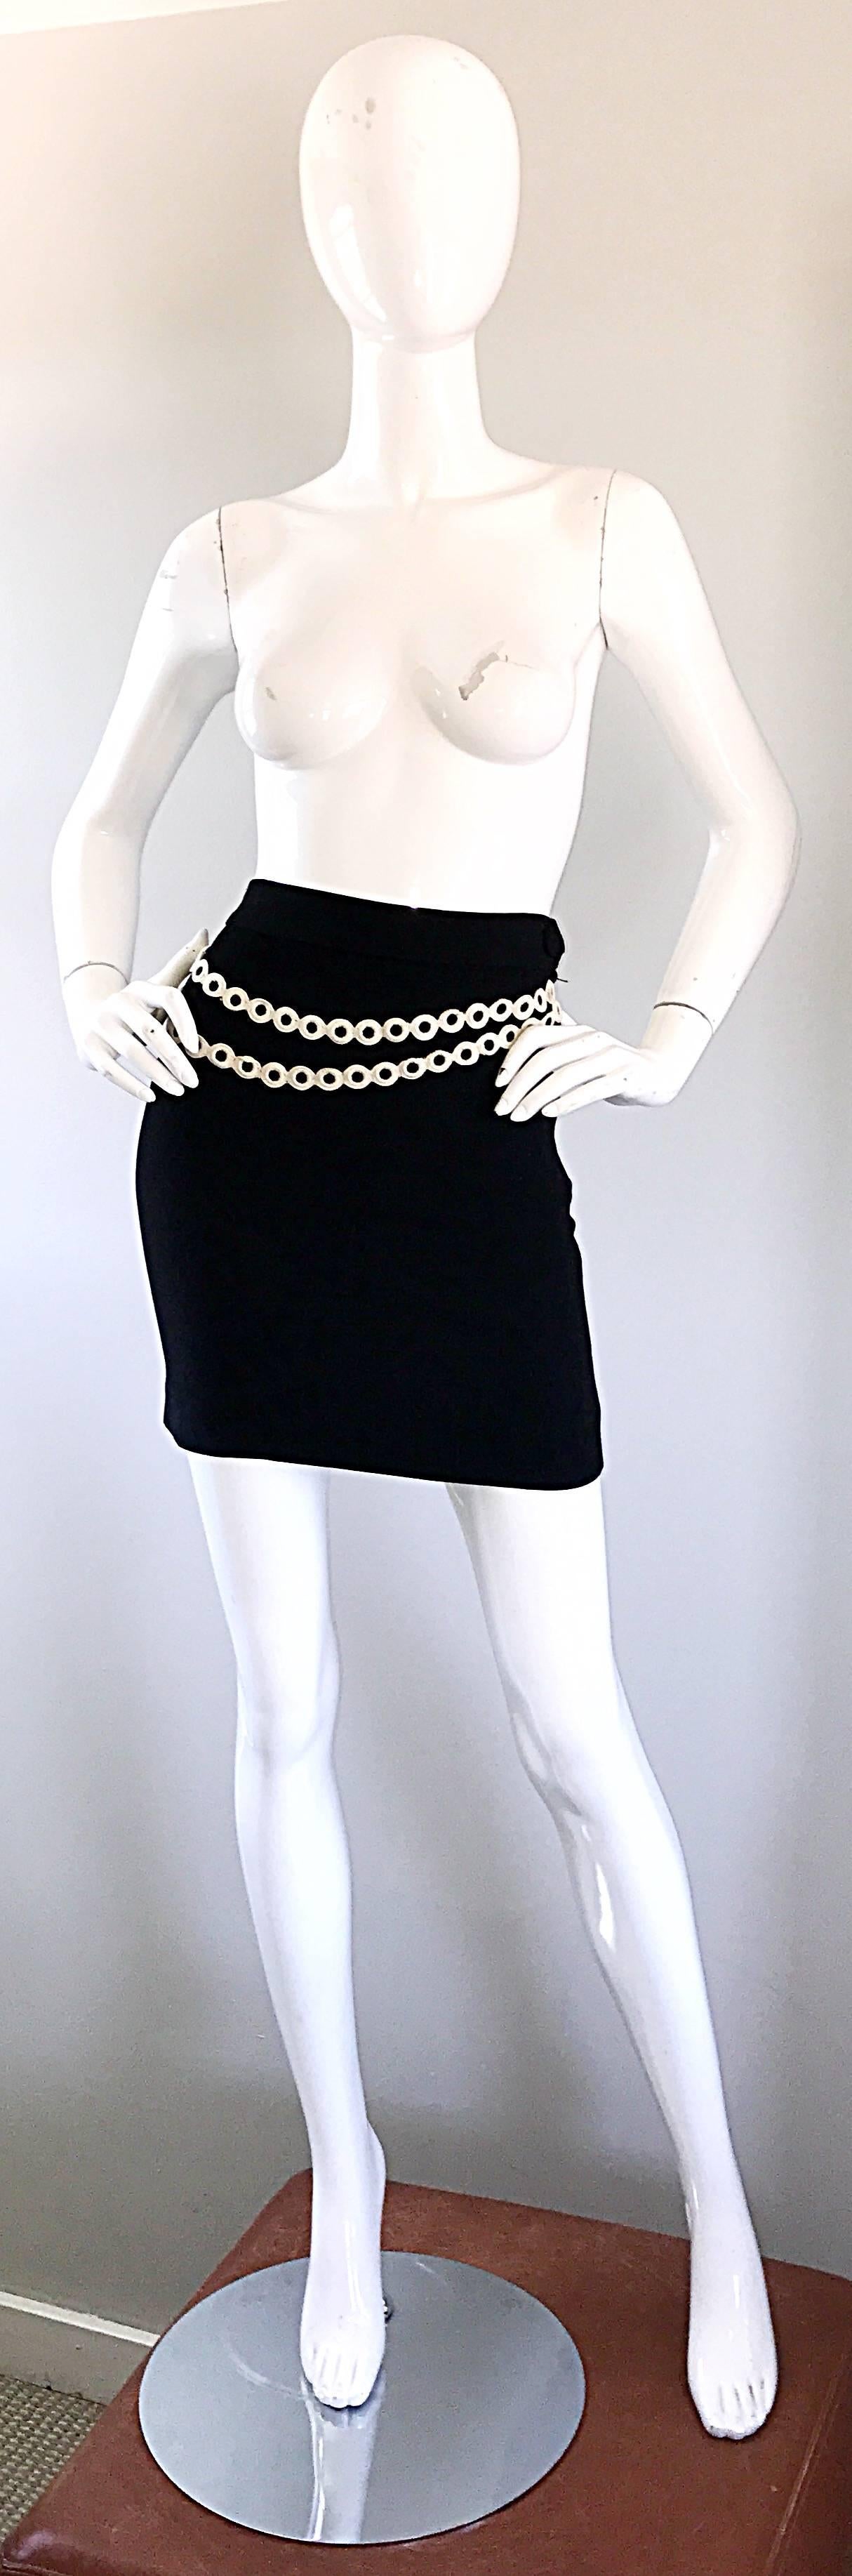 Sexy 90s MOSCHINO CHEAP AND CHIC black and white trompe l'oeil high waisted mini skirt! Black form fitting rayon crepe material with white embroidery on the front to look like a chain belt. Fully lined. Hidden zipper up the side with 
hook-and-eye